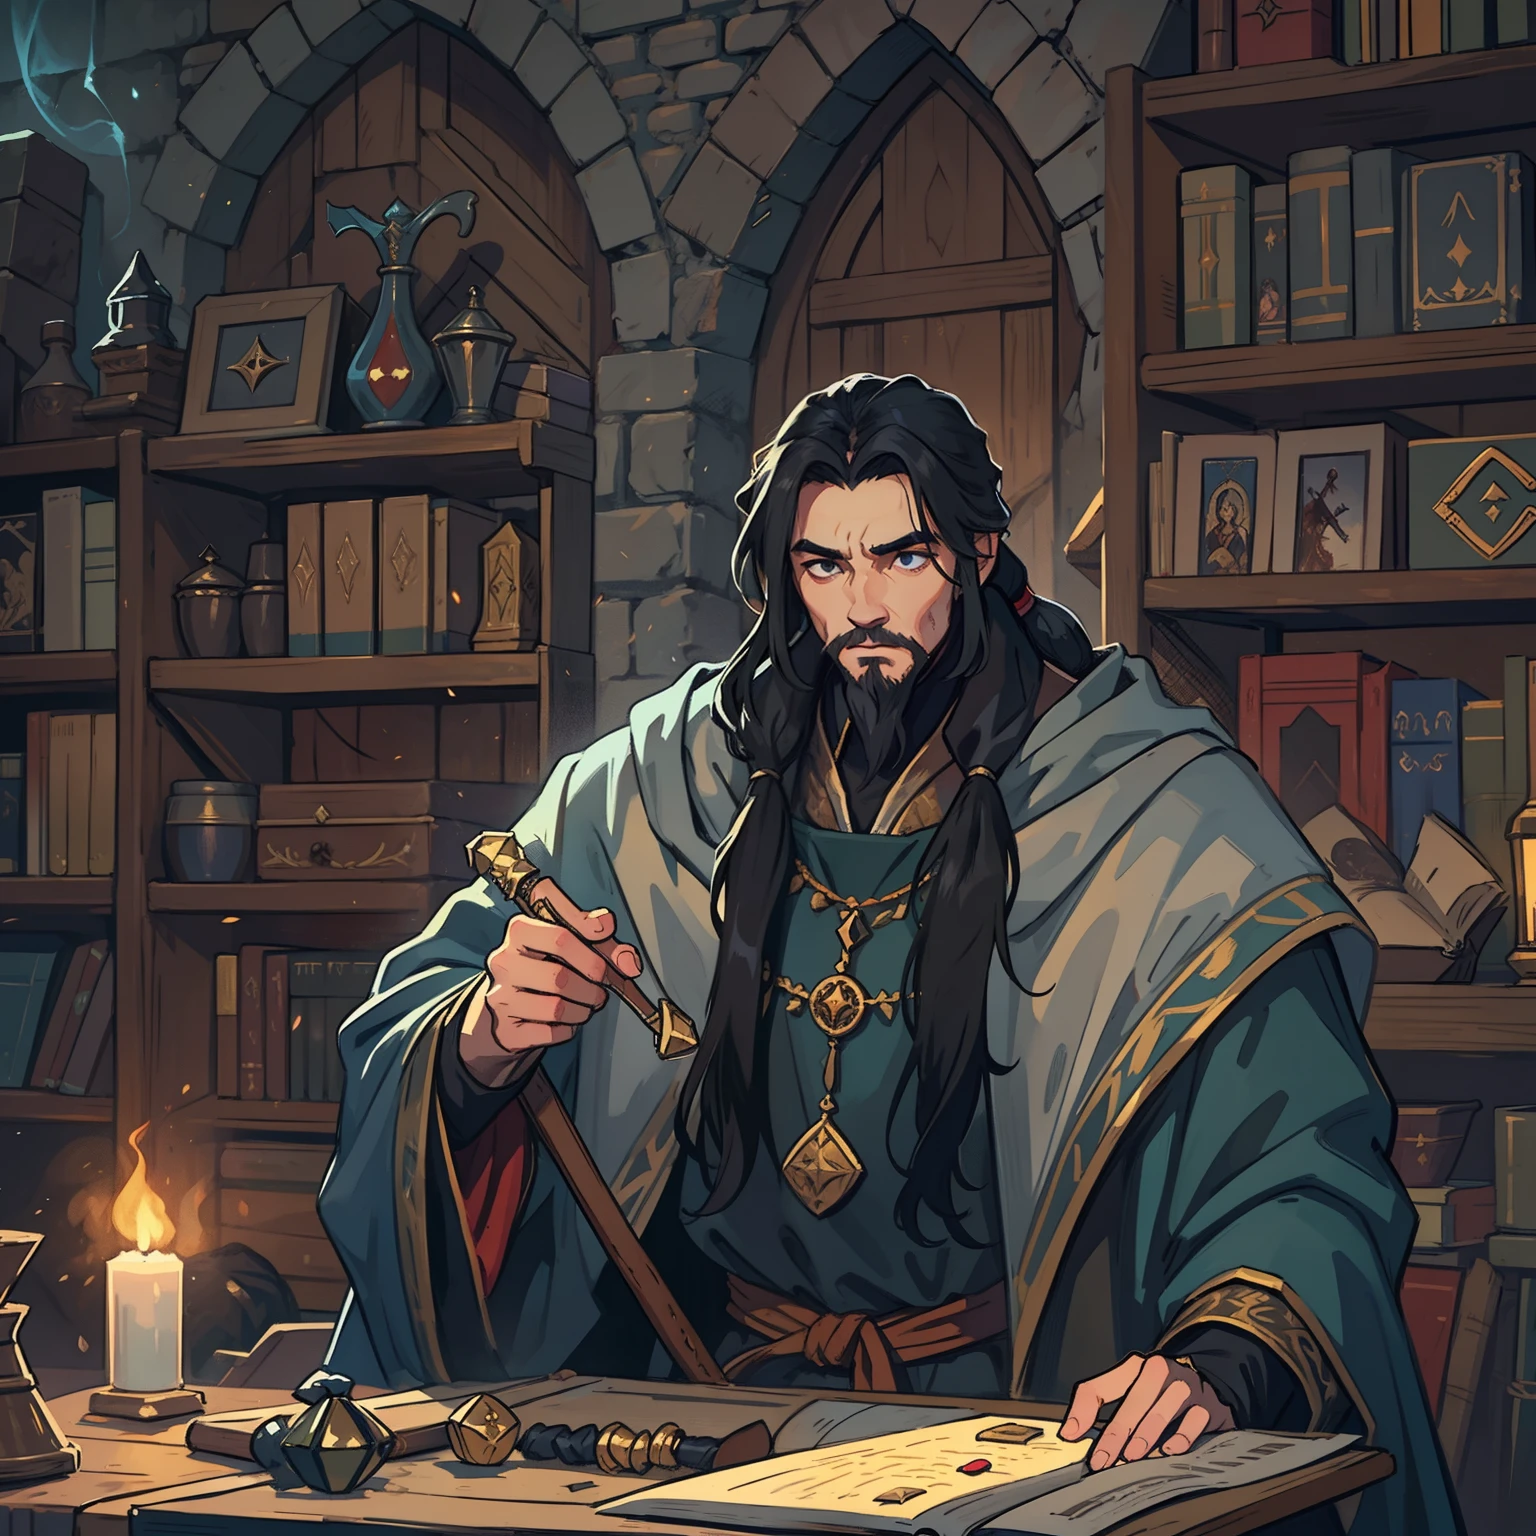 a man with long black hair ponytail hair ponytail he is a sorcerer wearing medieval sorcerer's robes a wizard for an rpg medieval rpg illustration rpg medieval art medieval illustration for medieval rpg dnd